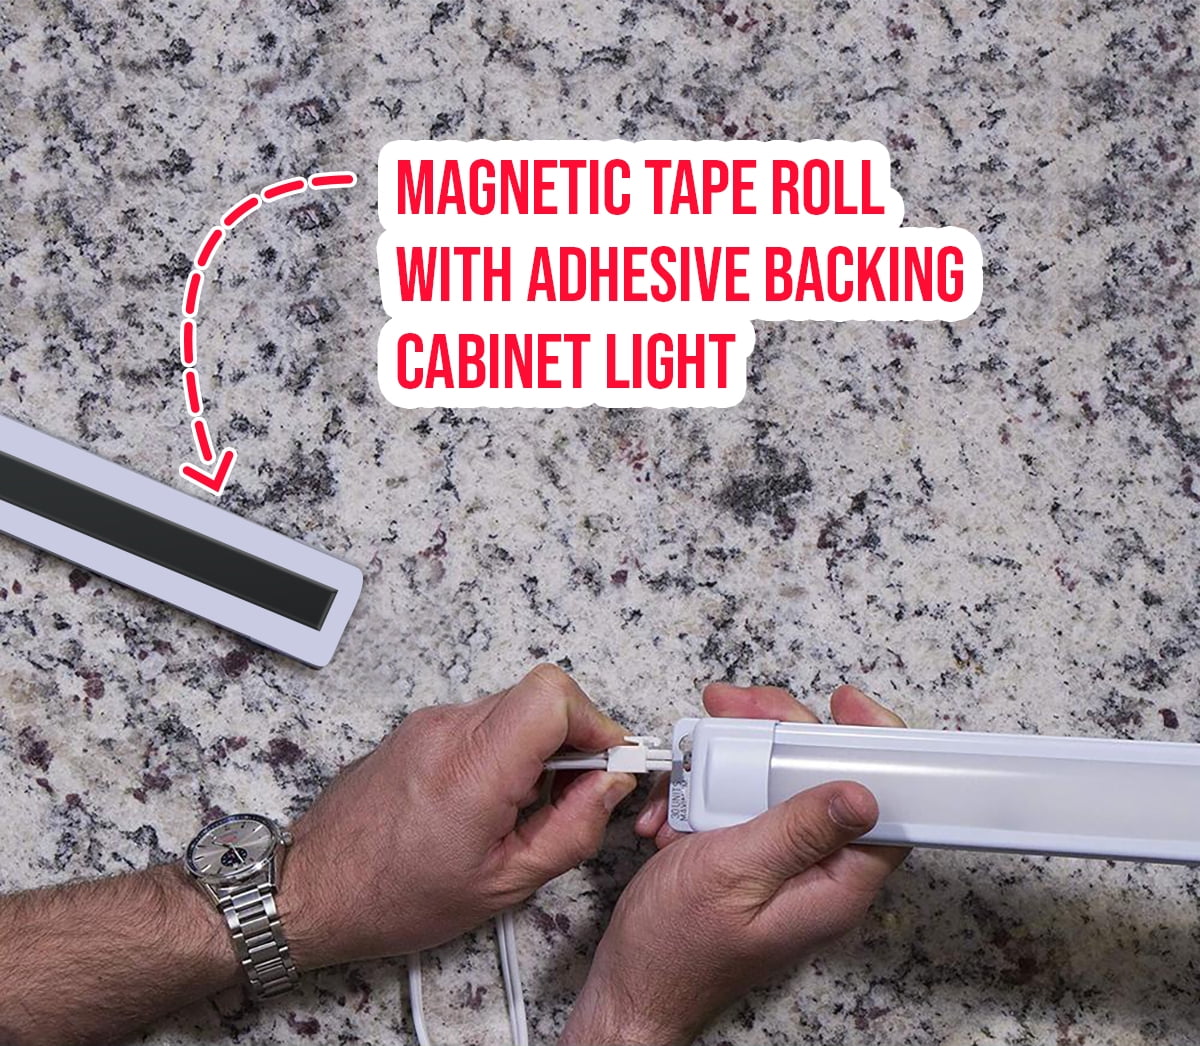 Magnetic Tape Roll with Adhesive Backing - Strip of Peel and Stick Magnets  - Super Strong & Sticky by Flexible Magnets (60 mil x 1 inch x 25 feet) 